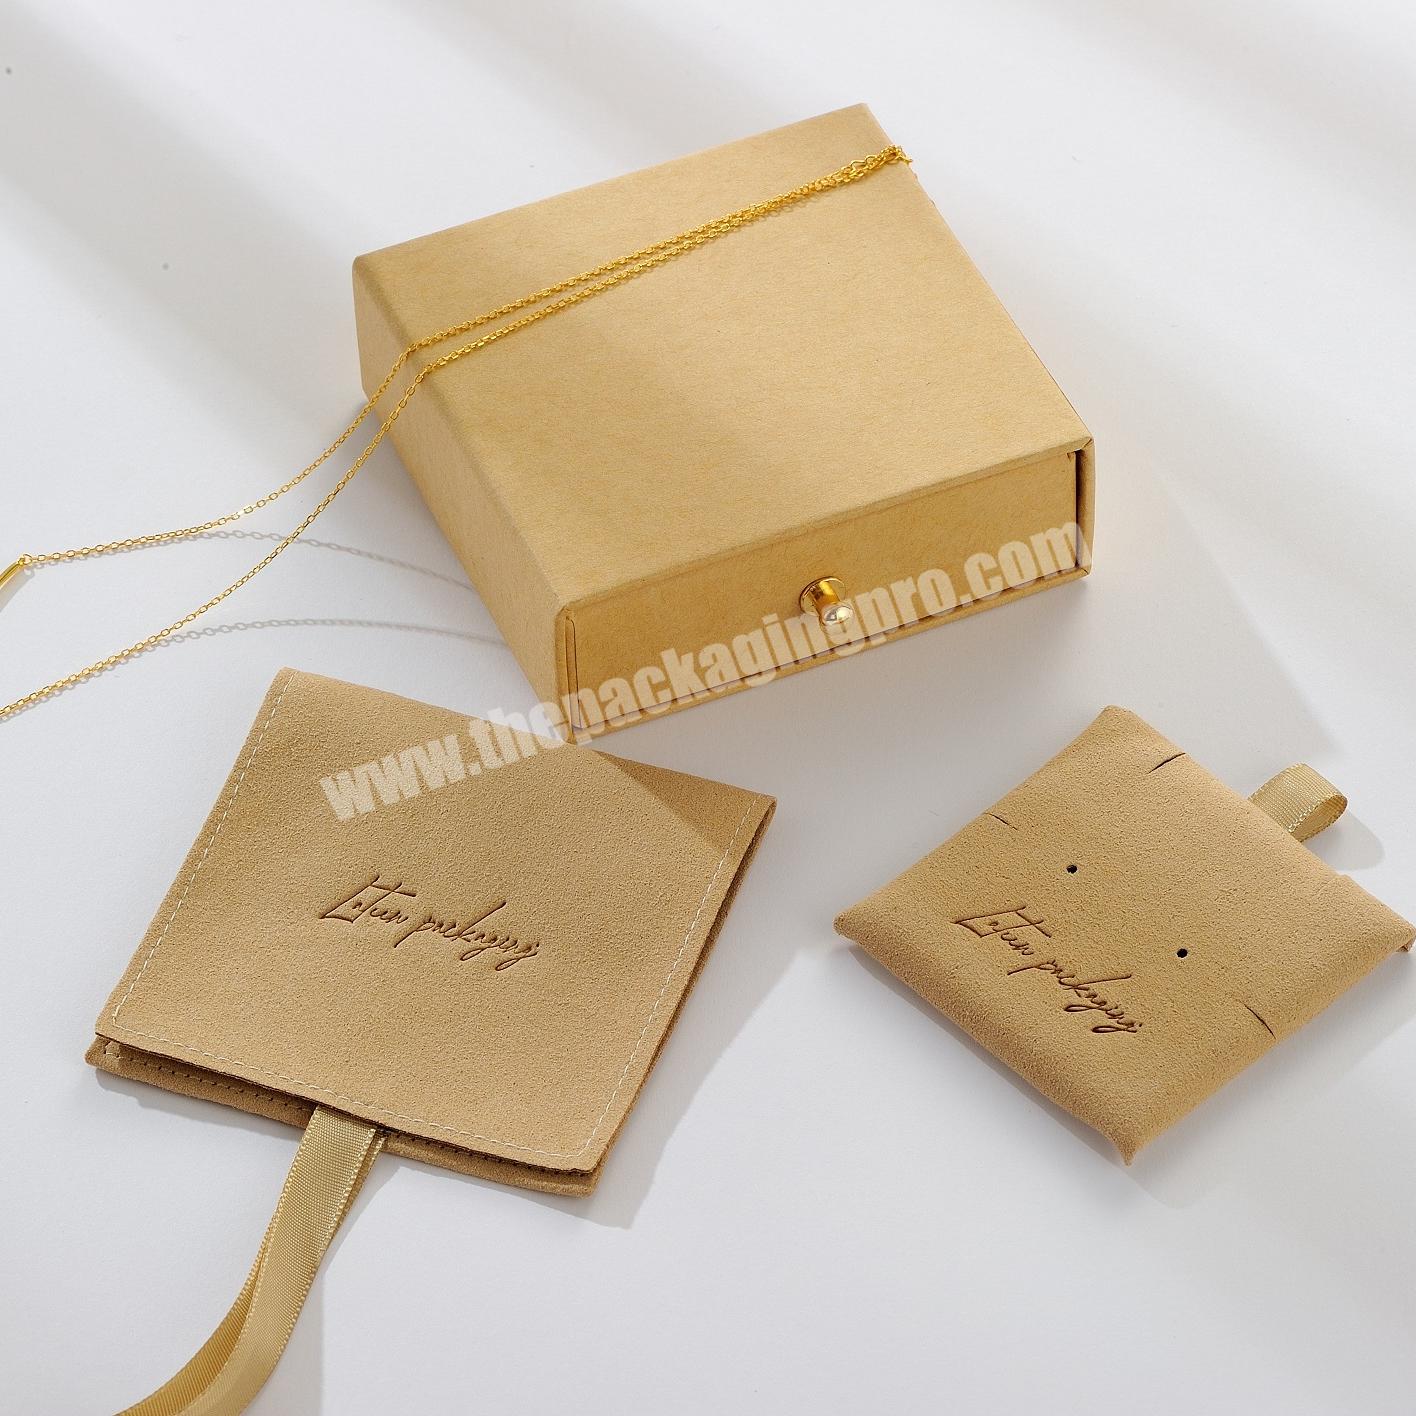 Wholesales Eco Friendly Brown Kraft Paper Gift Sliding Jewelry Box Bracelet Packaging Box with pouch insert